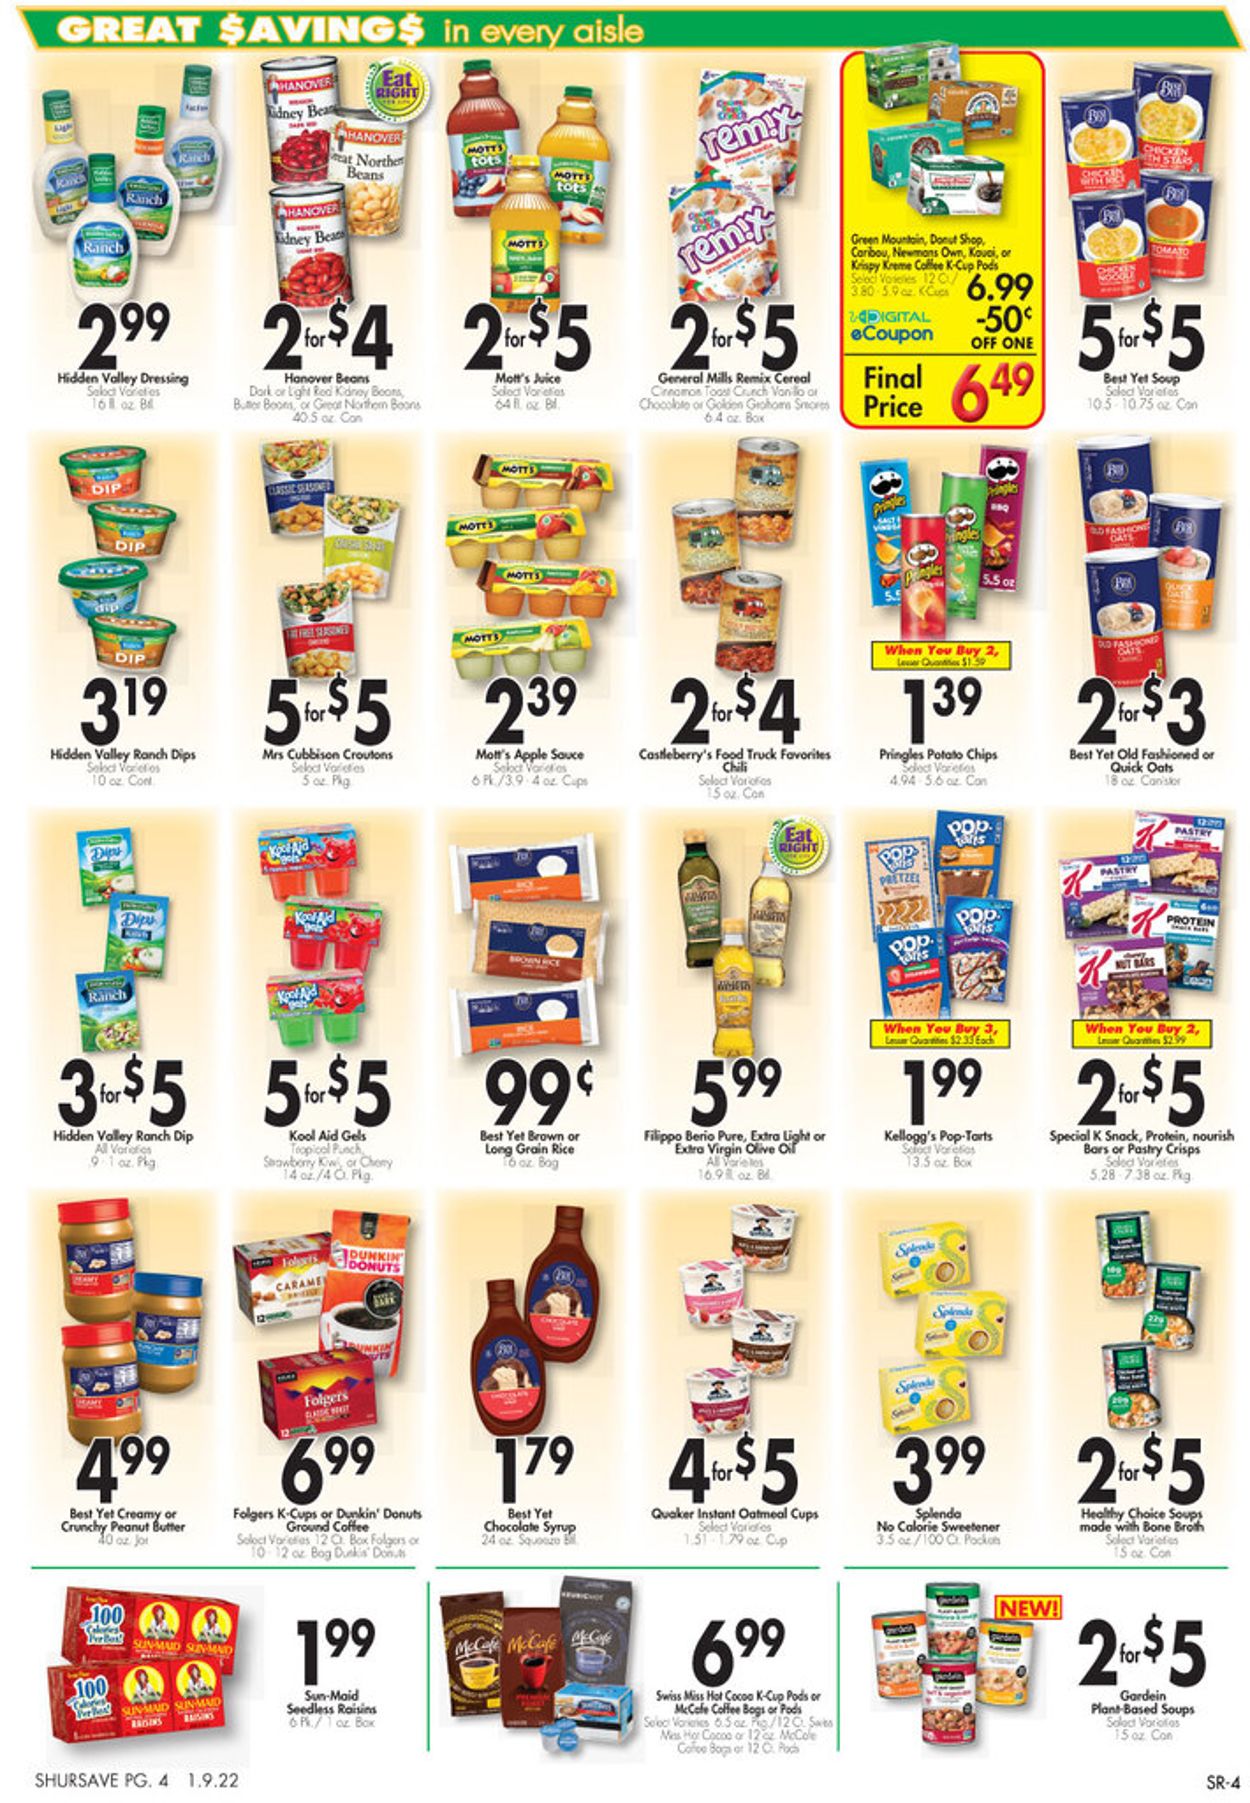 Gerrity's Supermarkets Ad from 01/09/2022